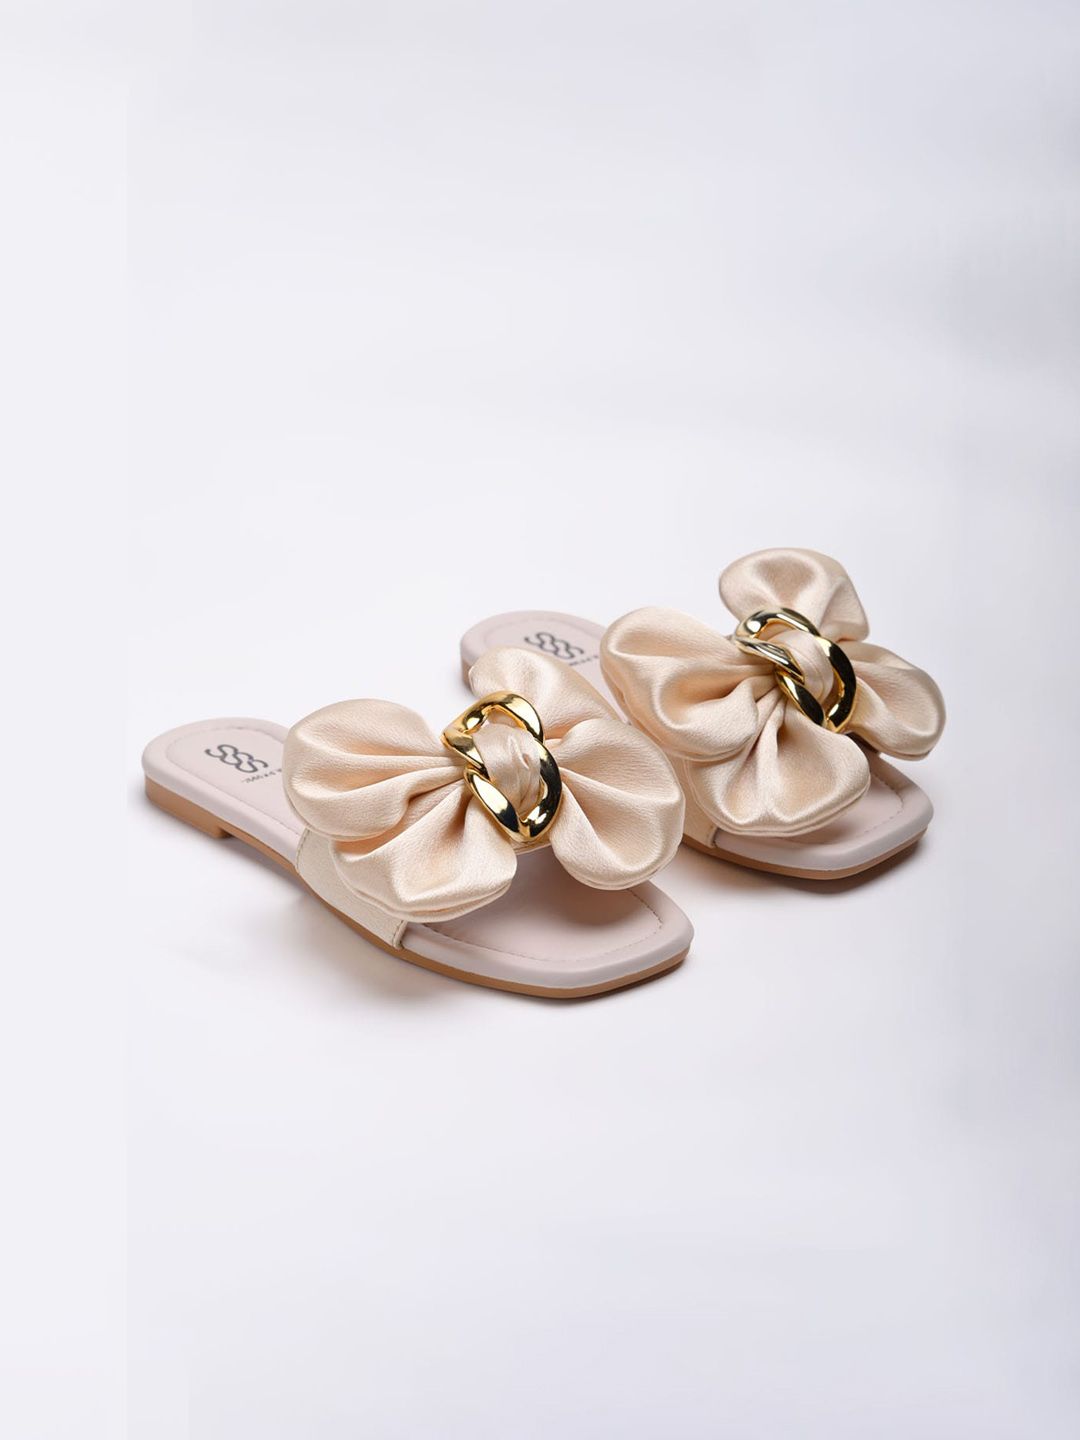 Street Style Store Embellished Open Toe Flats With Bows Price in India